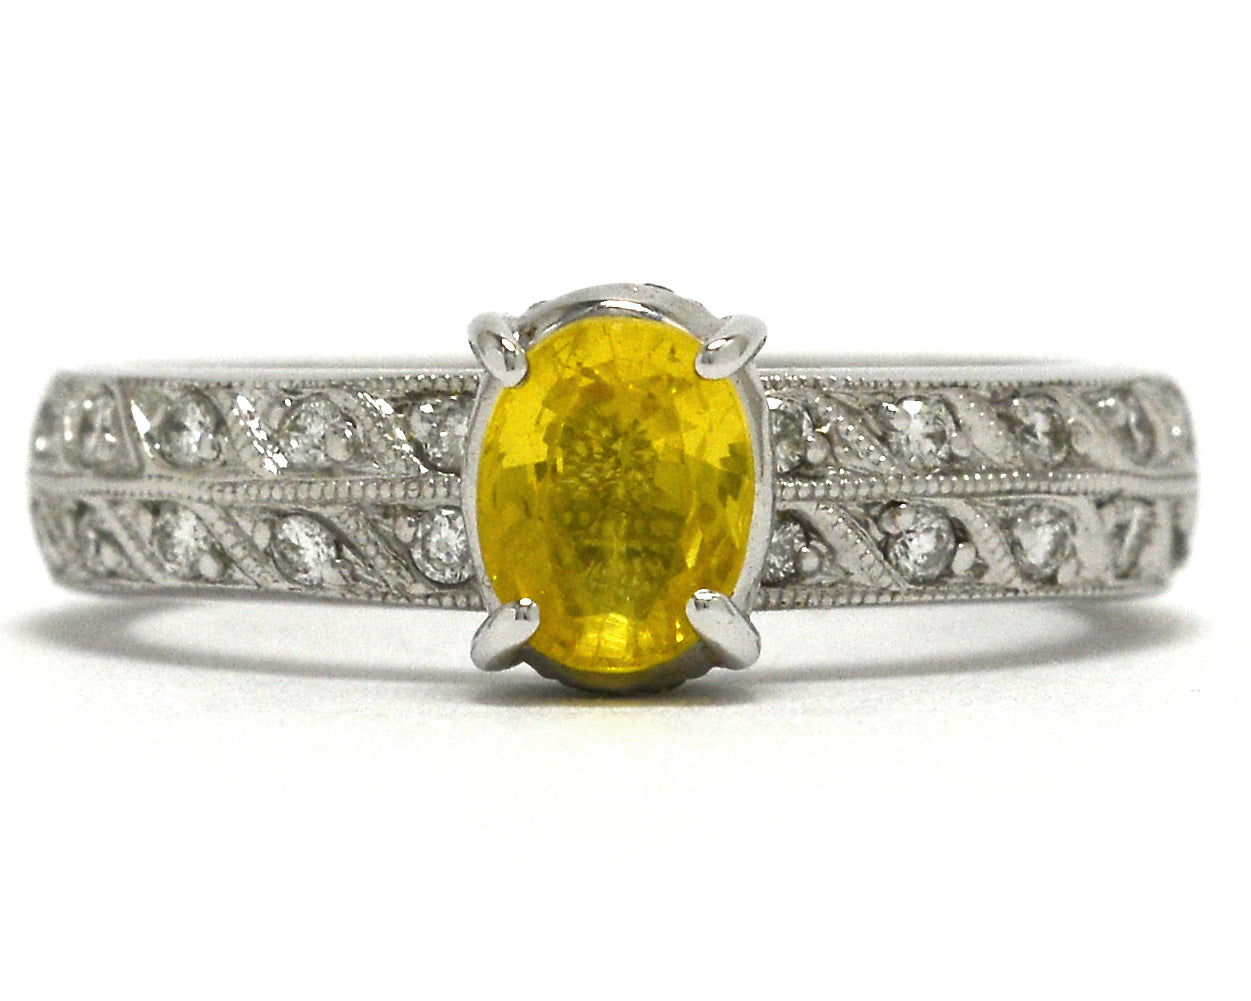 1 carat oval faceted yellow sapphire wedding ring with 2 rows of diamonds on the band.